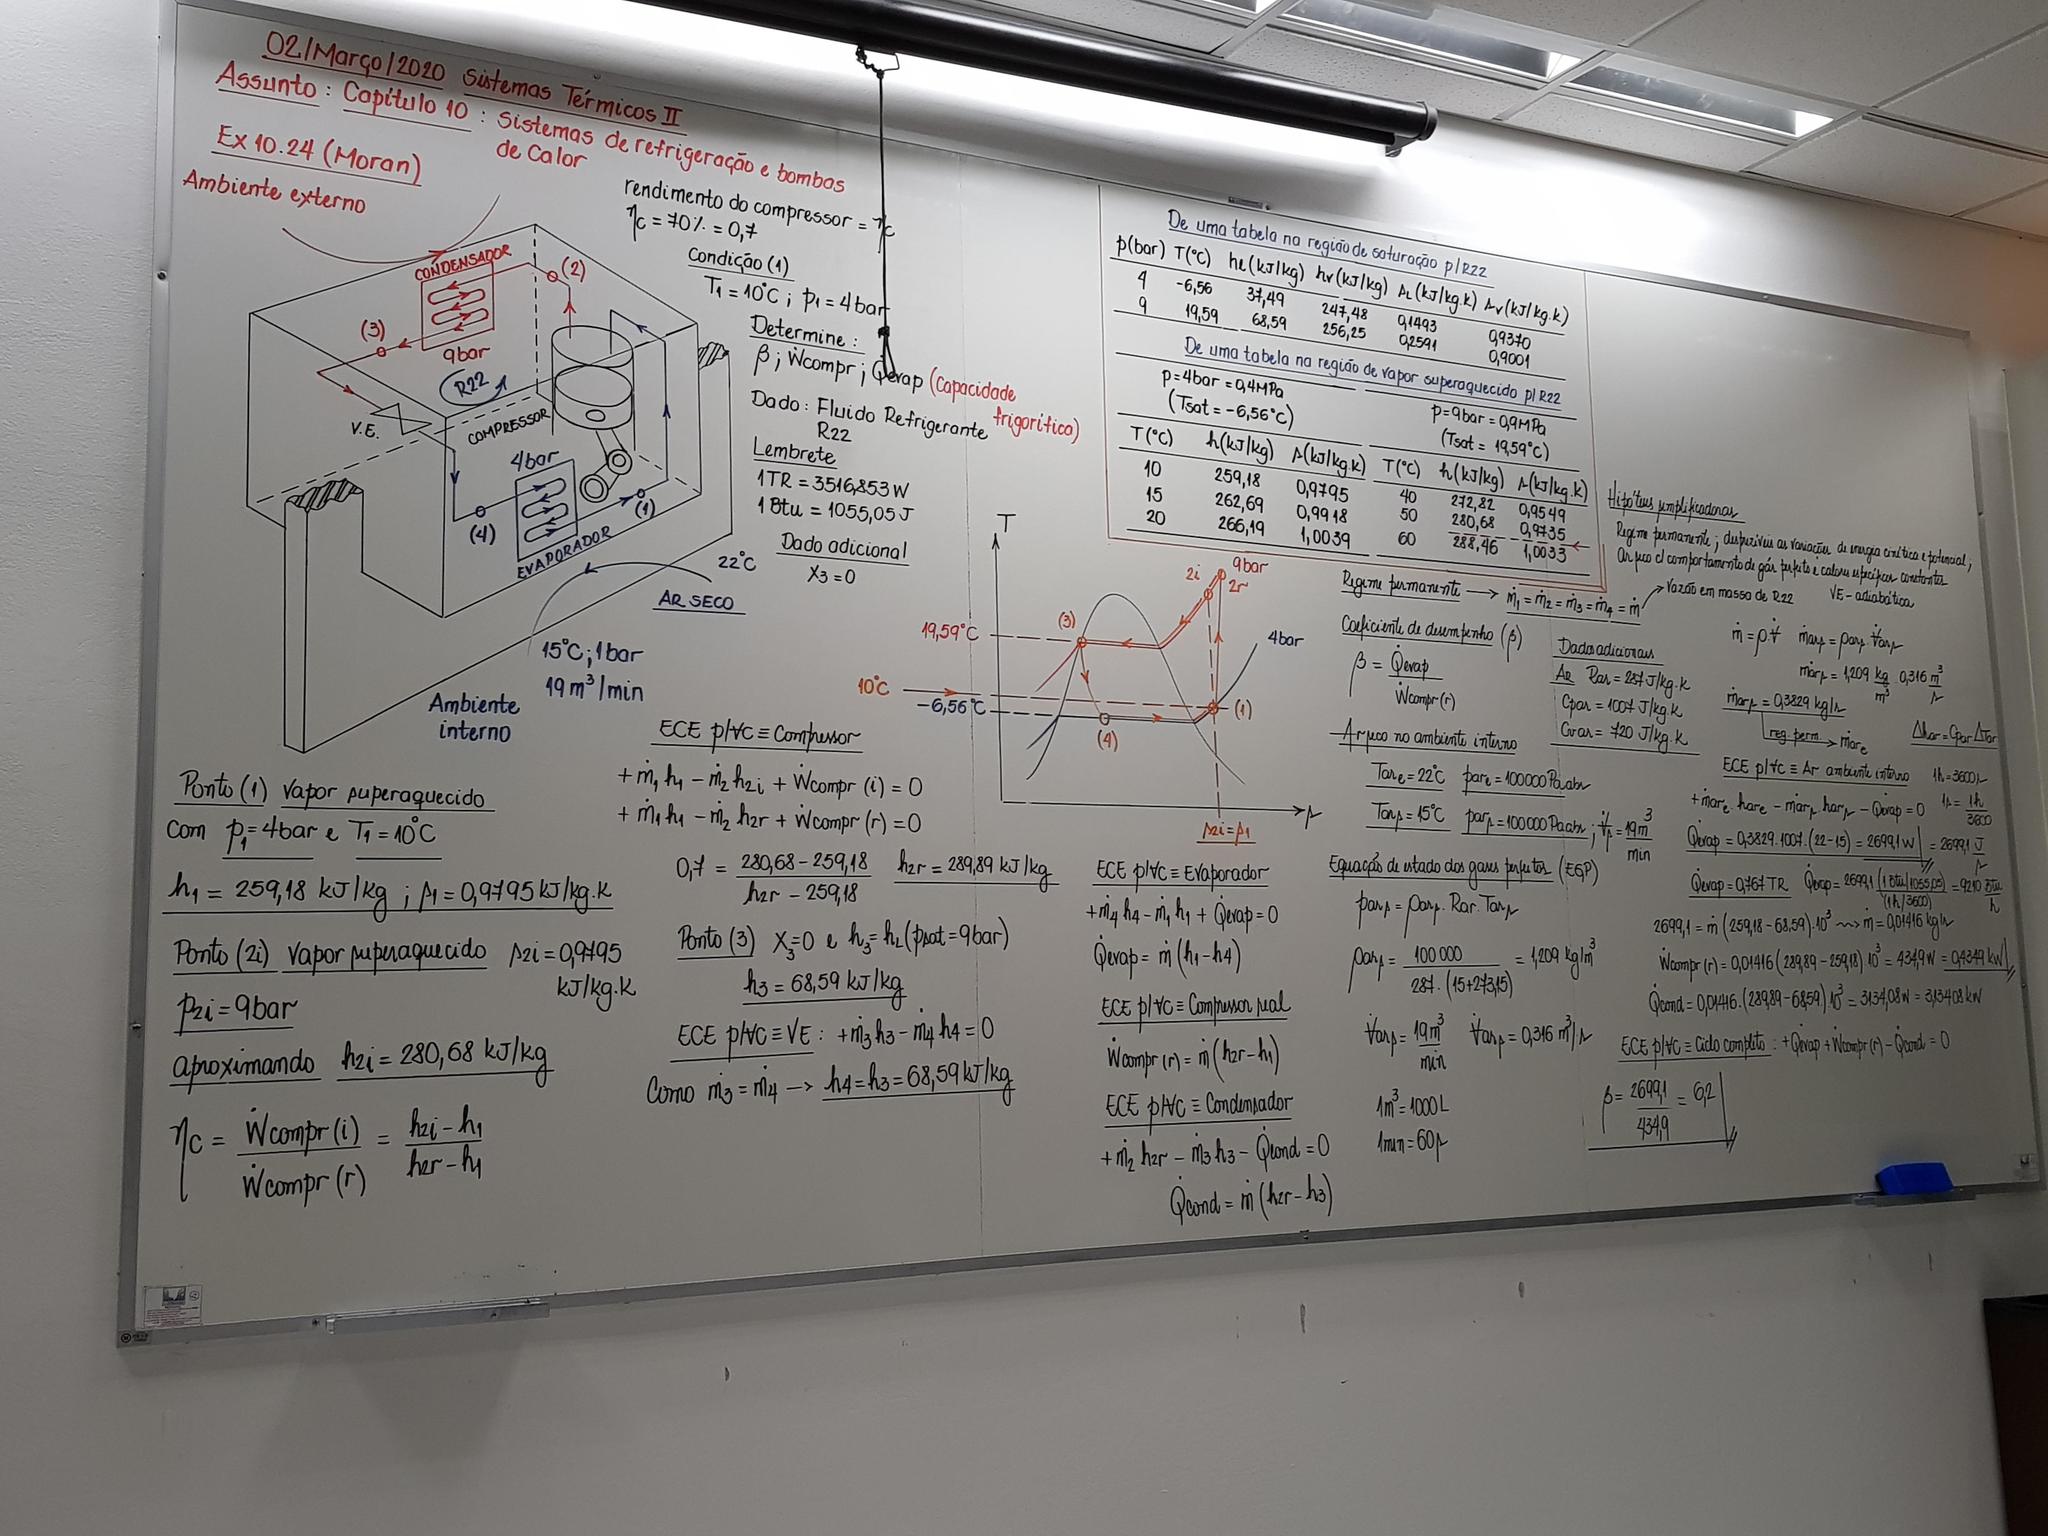 “This is what the blackboard looks like in the classroom after classes with one of the best professors at the university.” - The photo, University, Studies, Professor, Handwriting, Engineer, Reddit